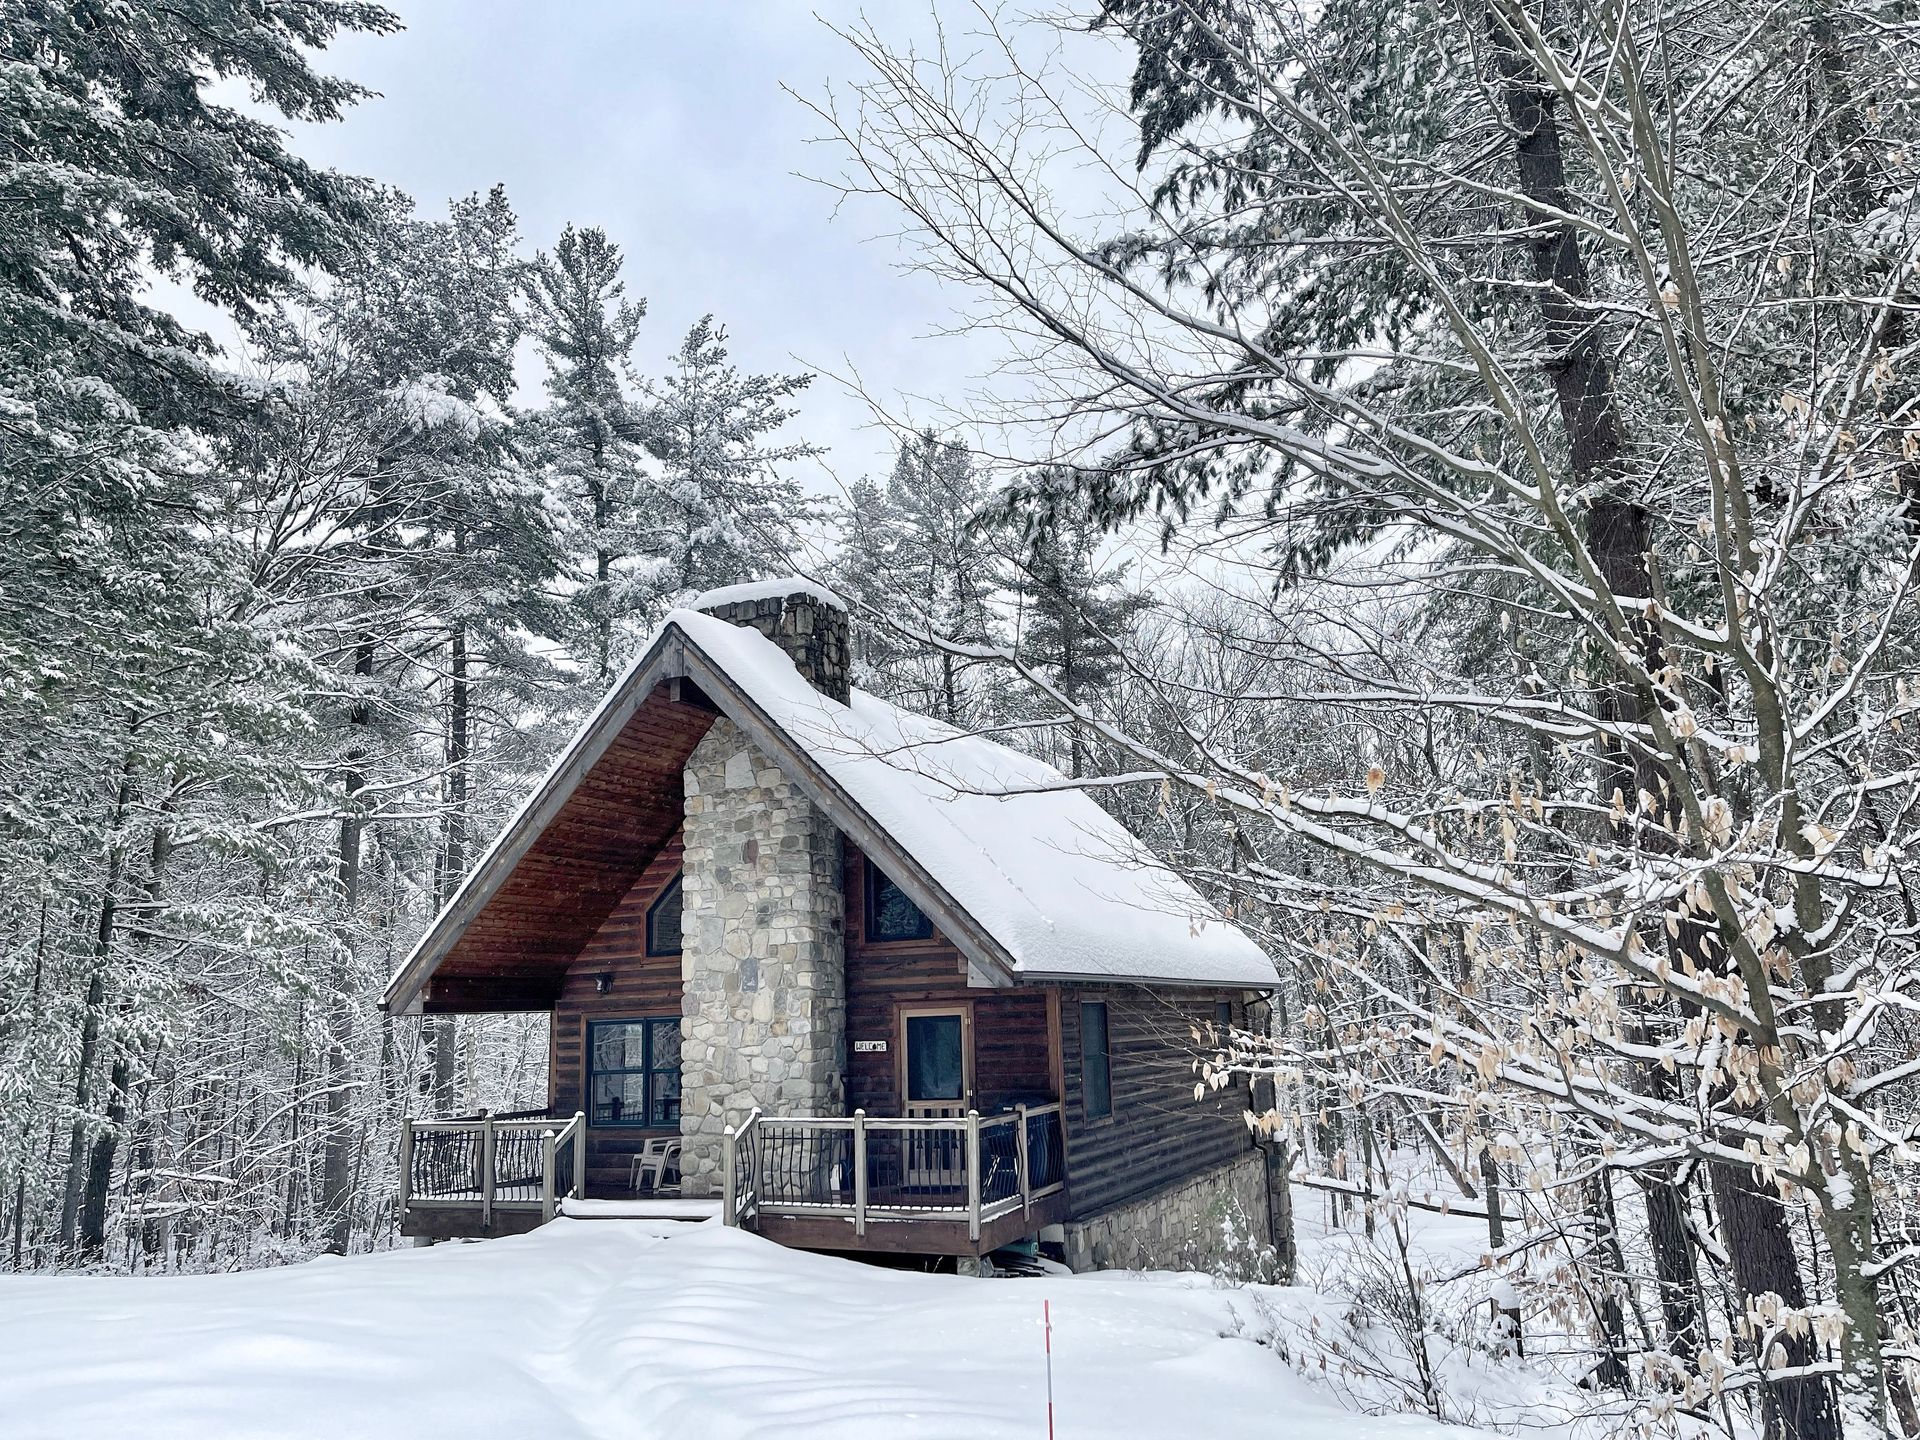 Adirondack Vacation Rental Home in the Snow